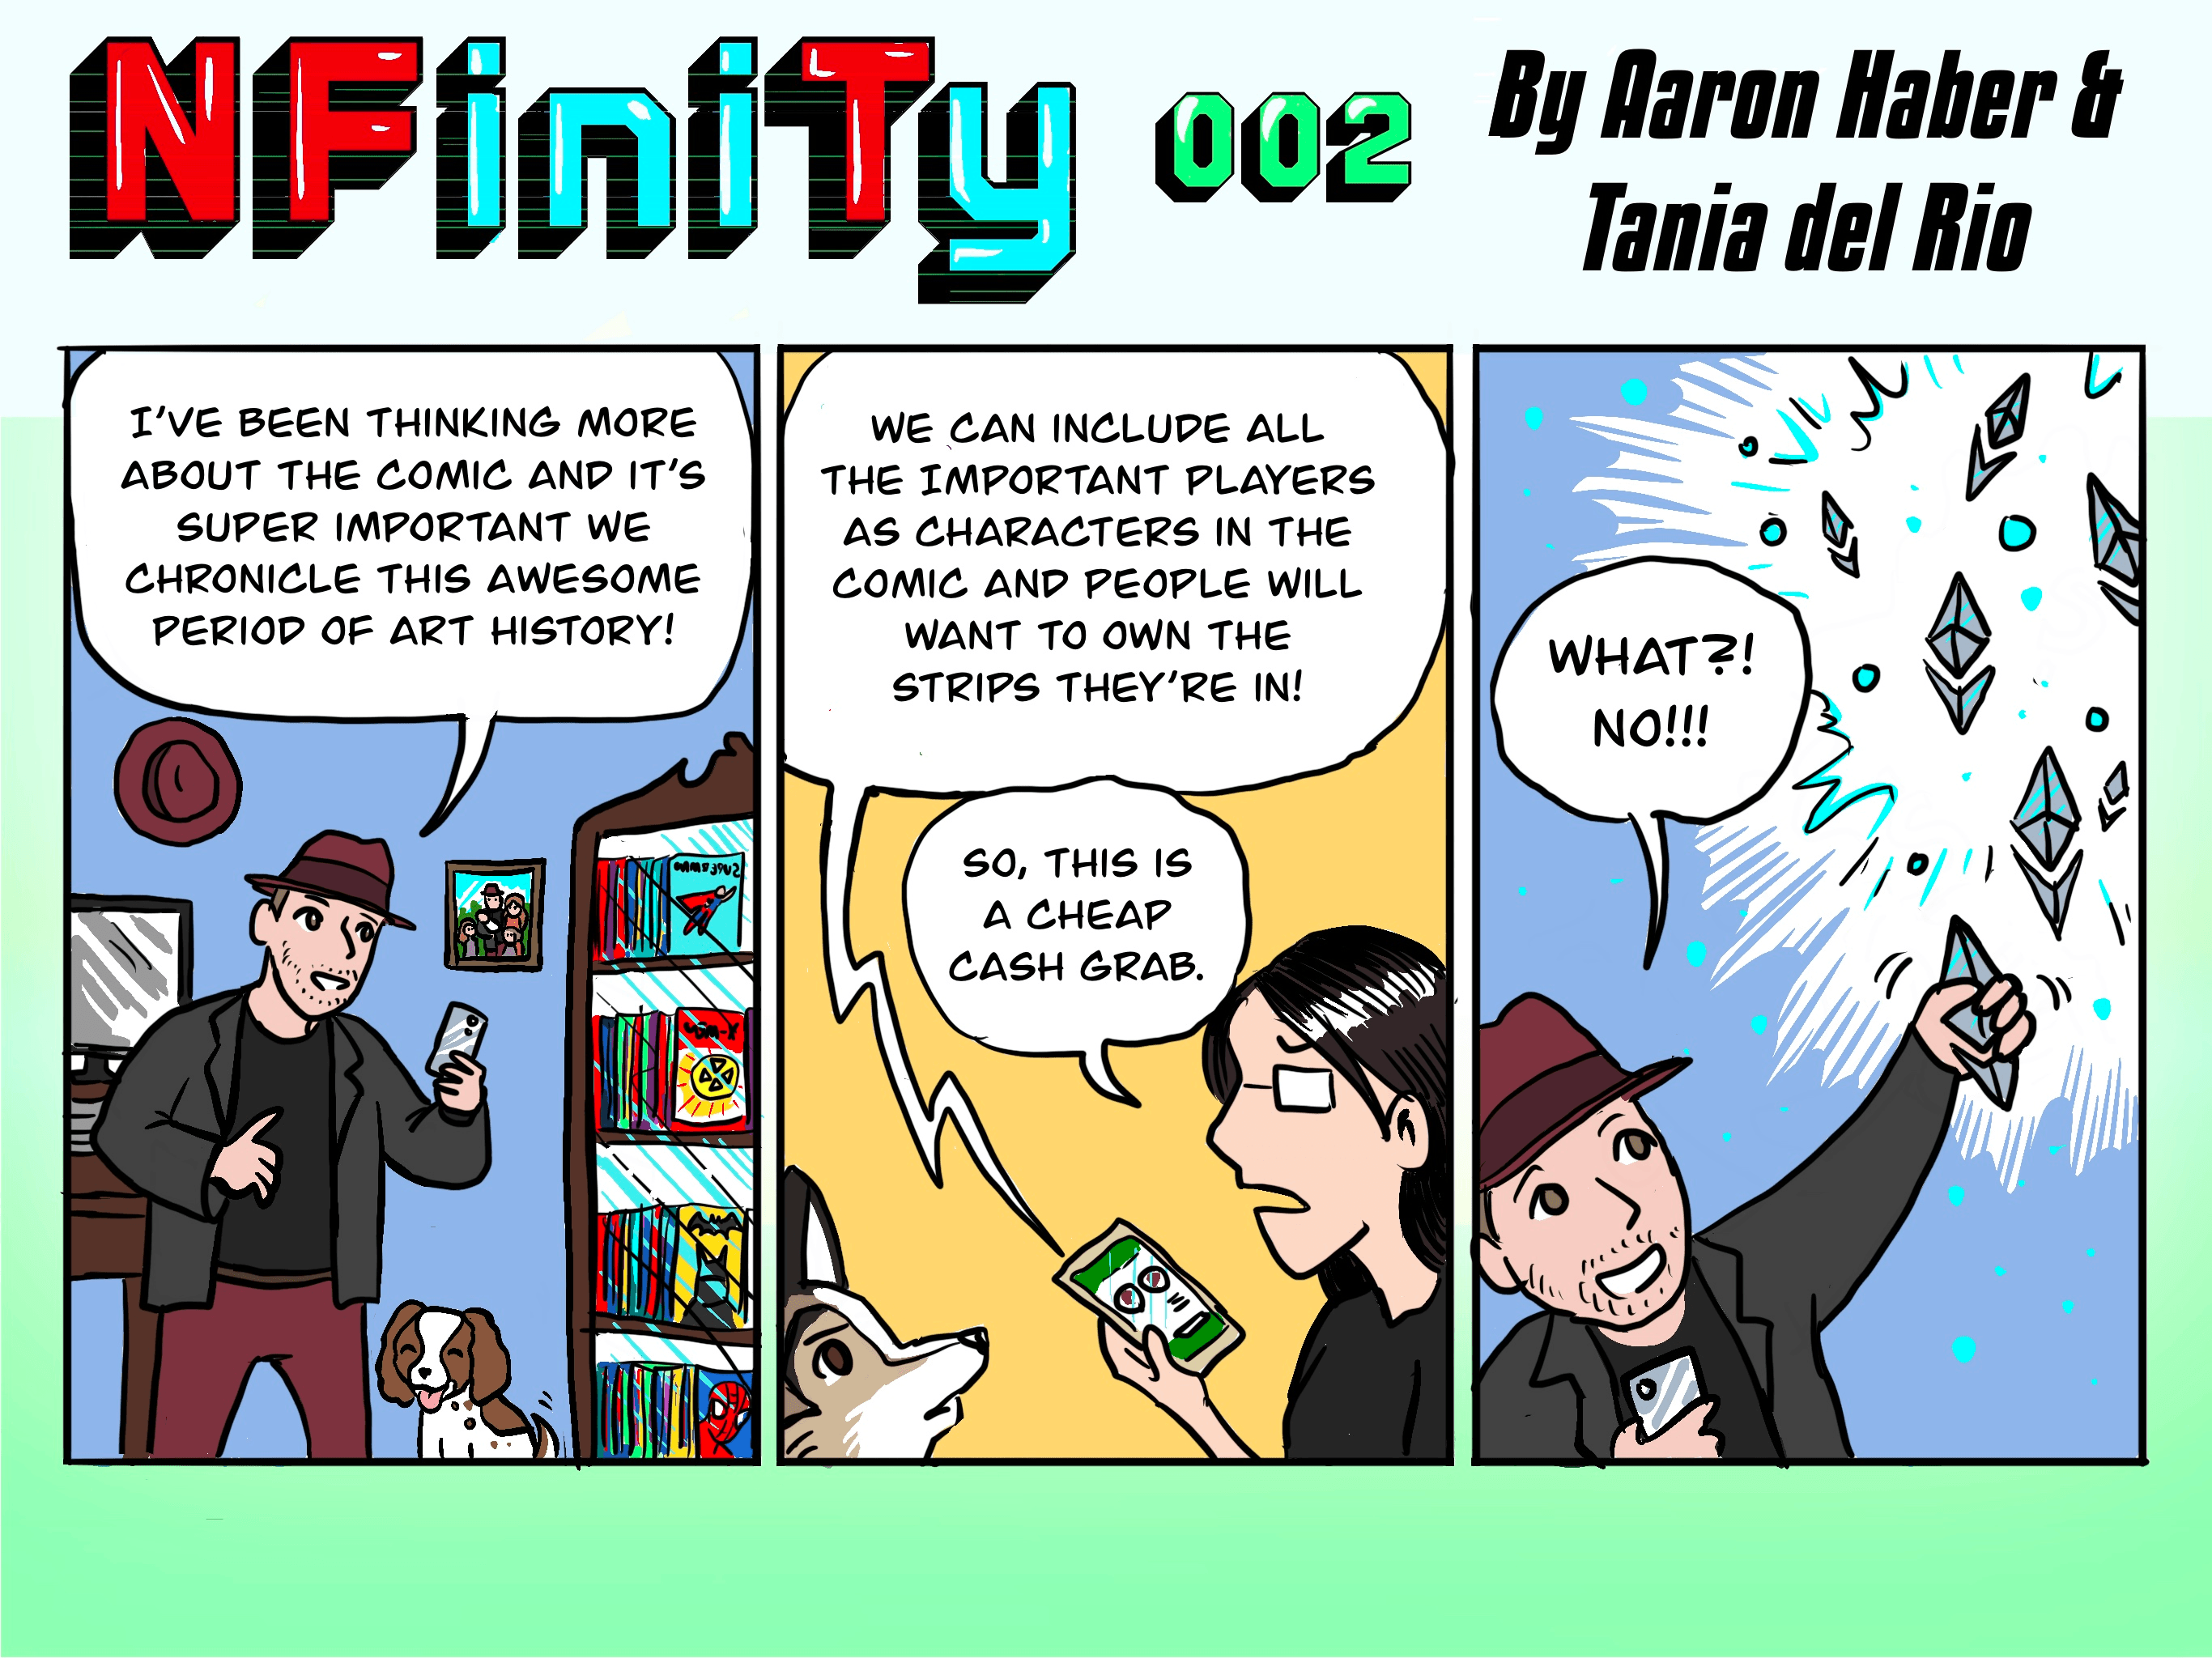 NFinity: The Comic Strip Series - Episode 002